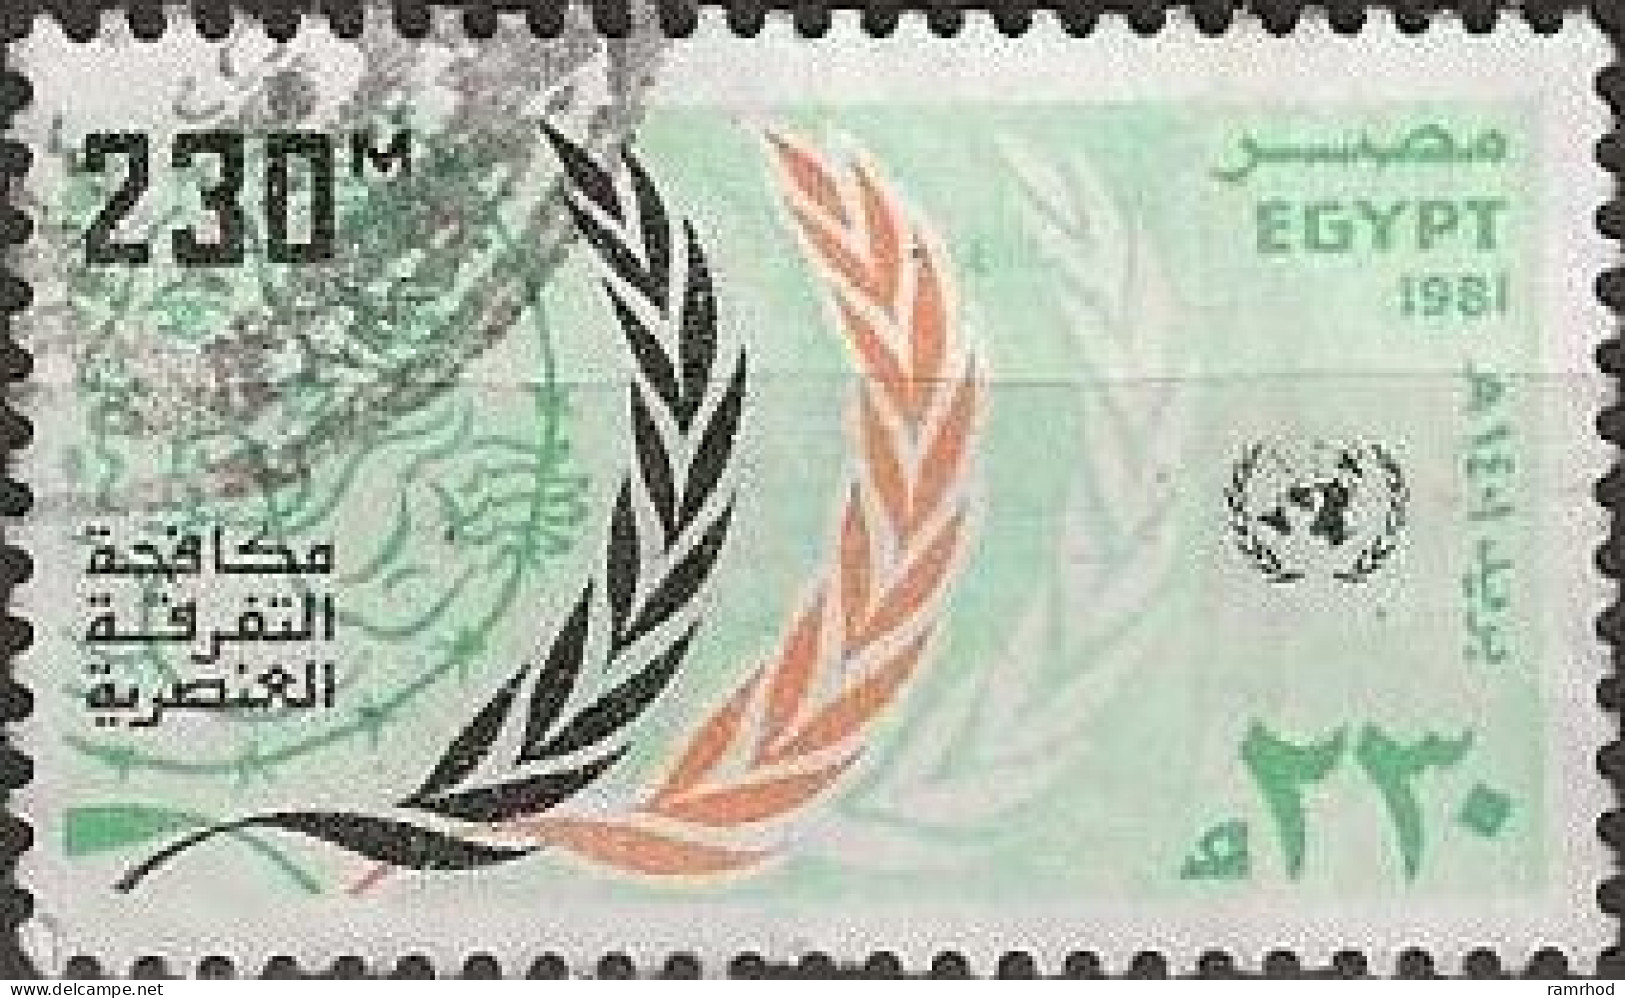 EGYPT 1981 United Nations Day - 230m. Olive Branches (Racial Discrimination Day) FU - Gebraucht